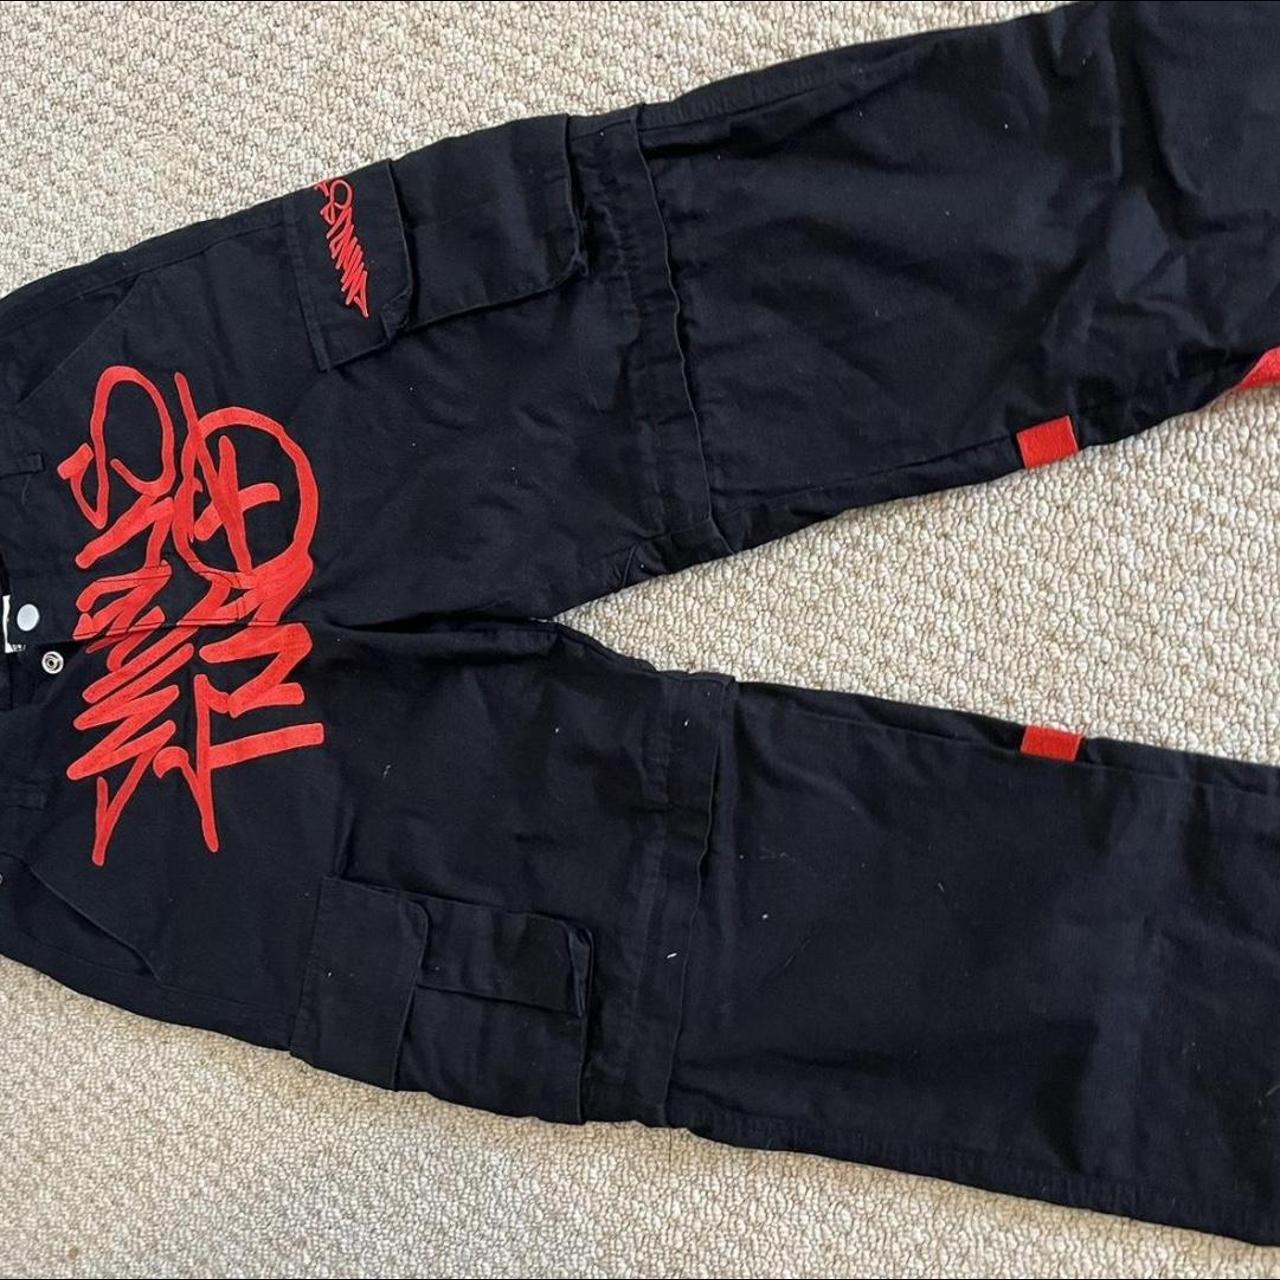 Minus two y2k cargos black and red Size large and... - Depop